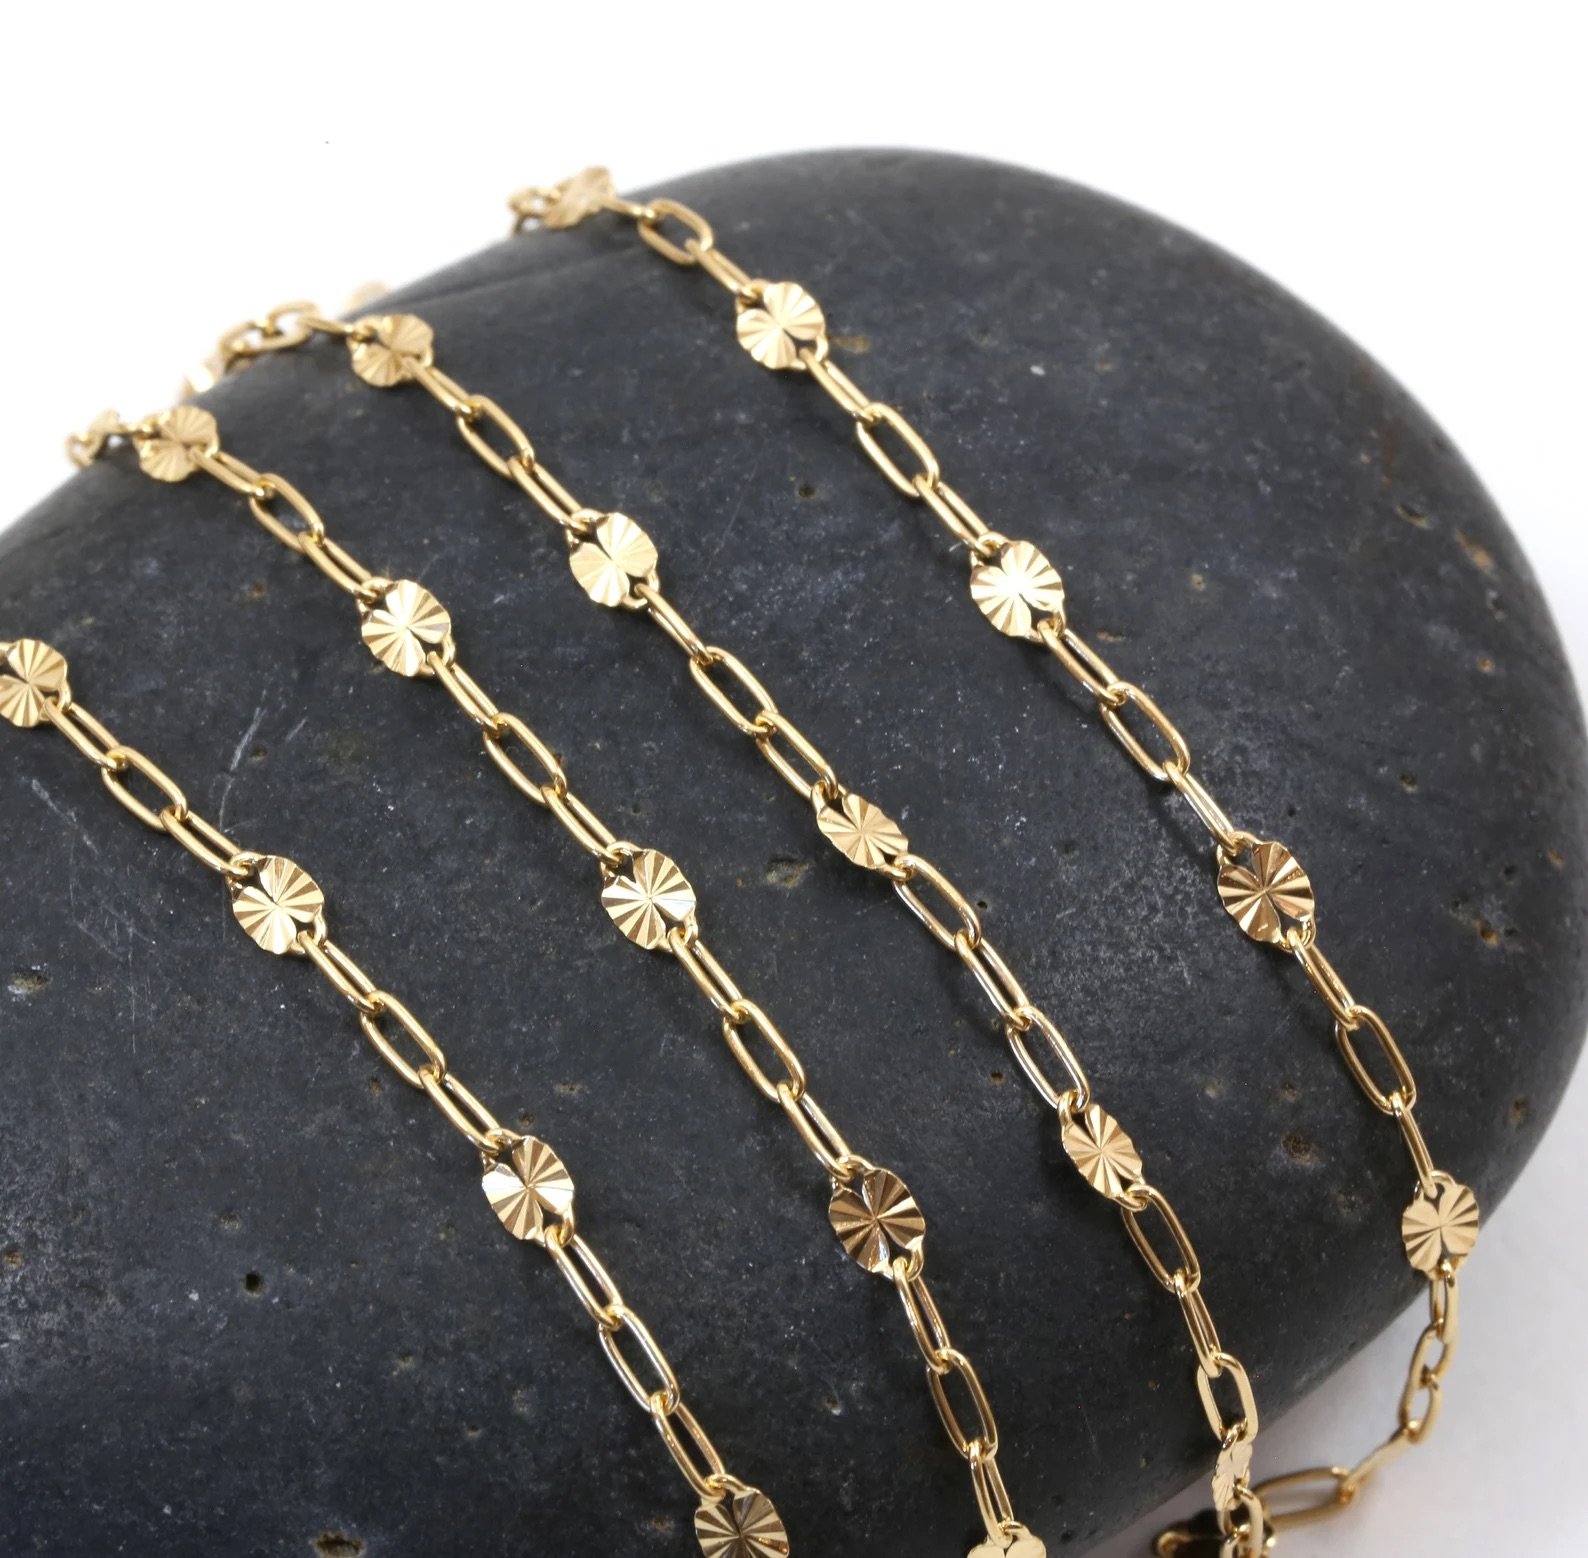 14k Gold Filled Chains for Jewelry Making Permanent Jewelry Chain